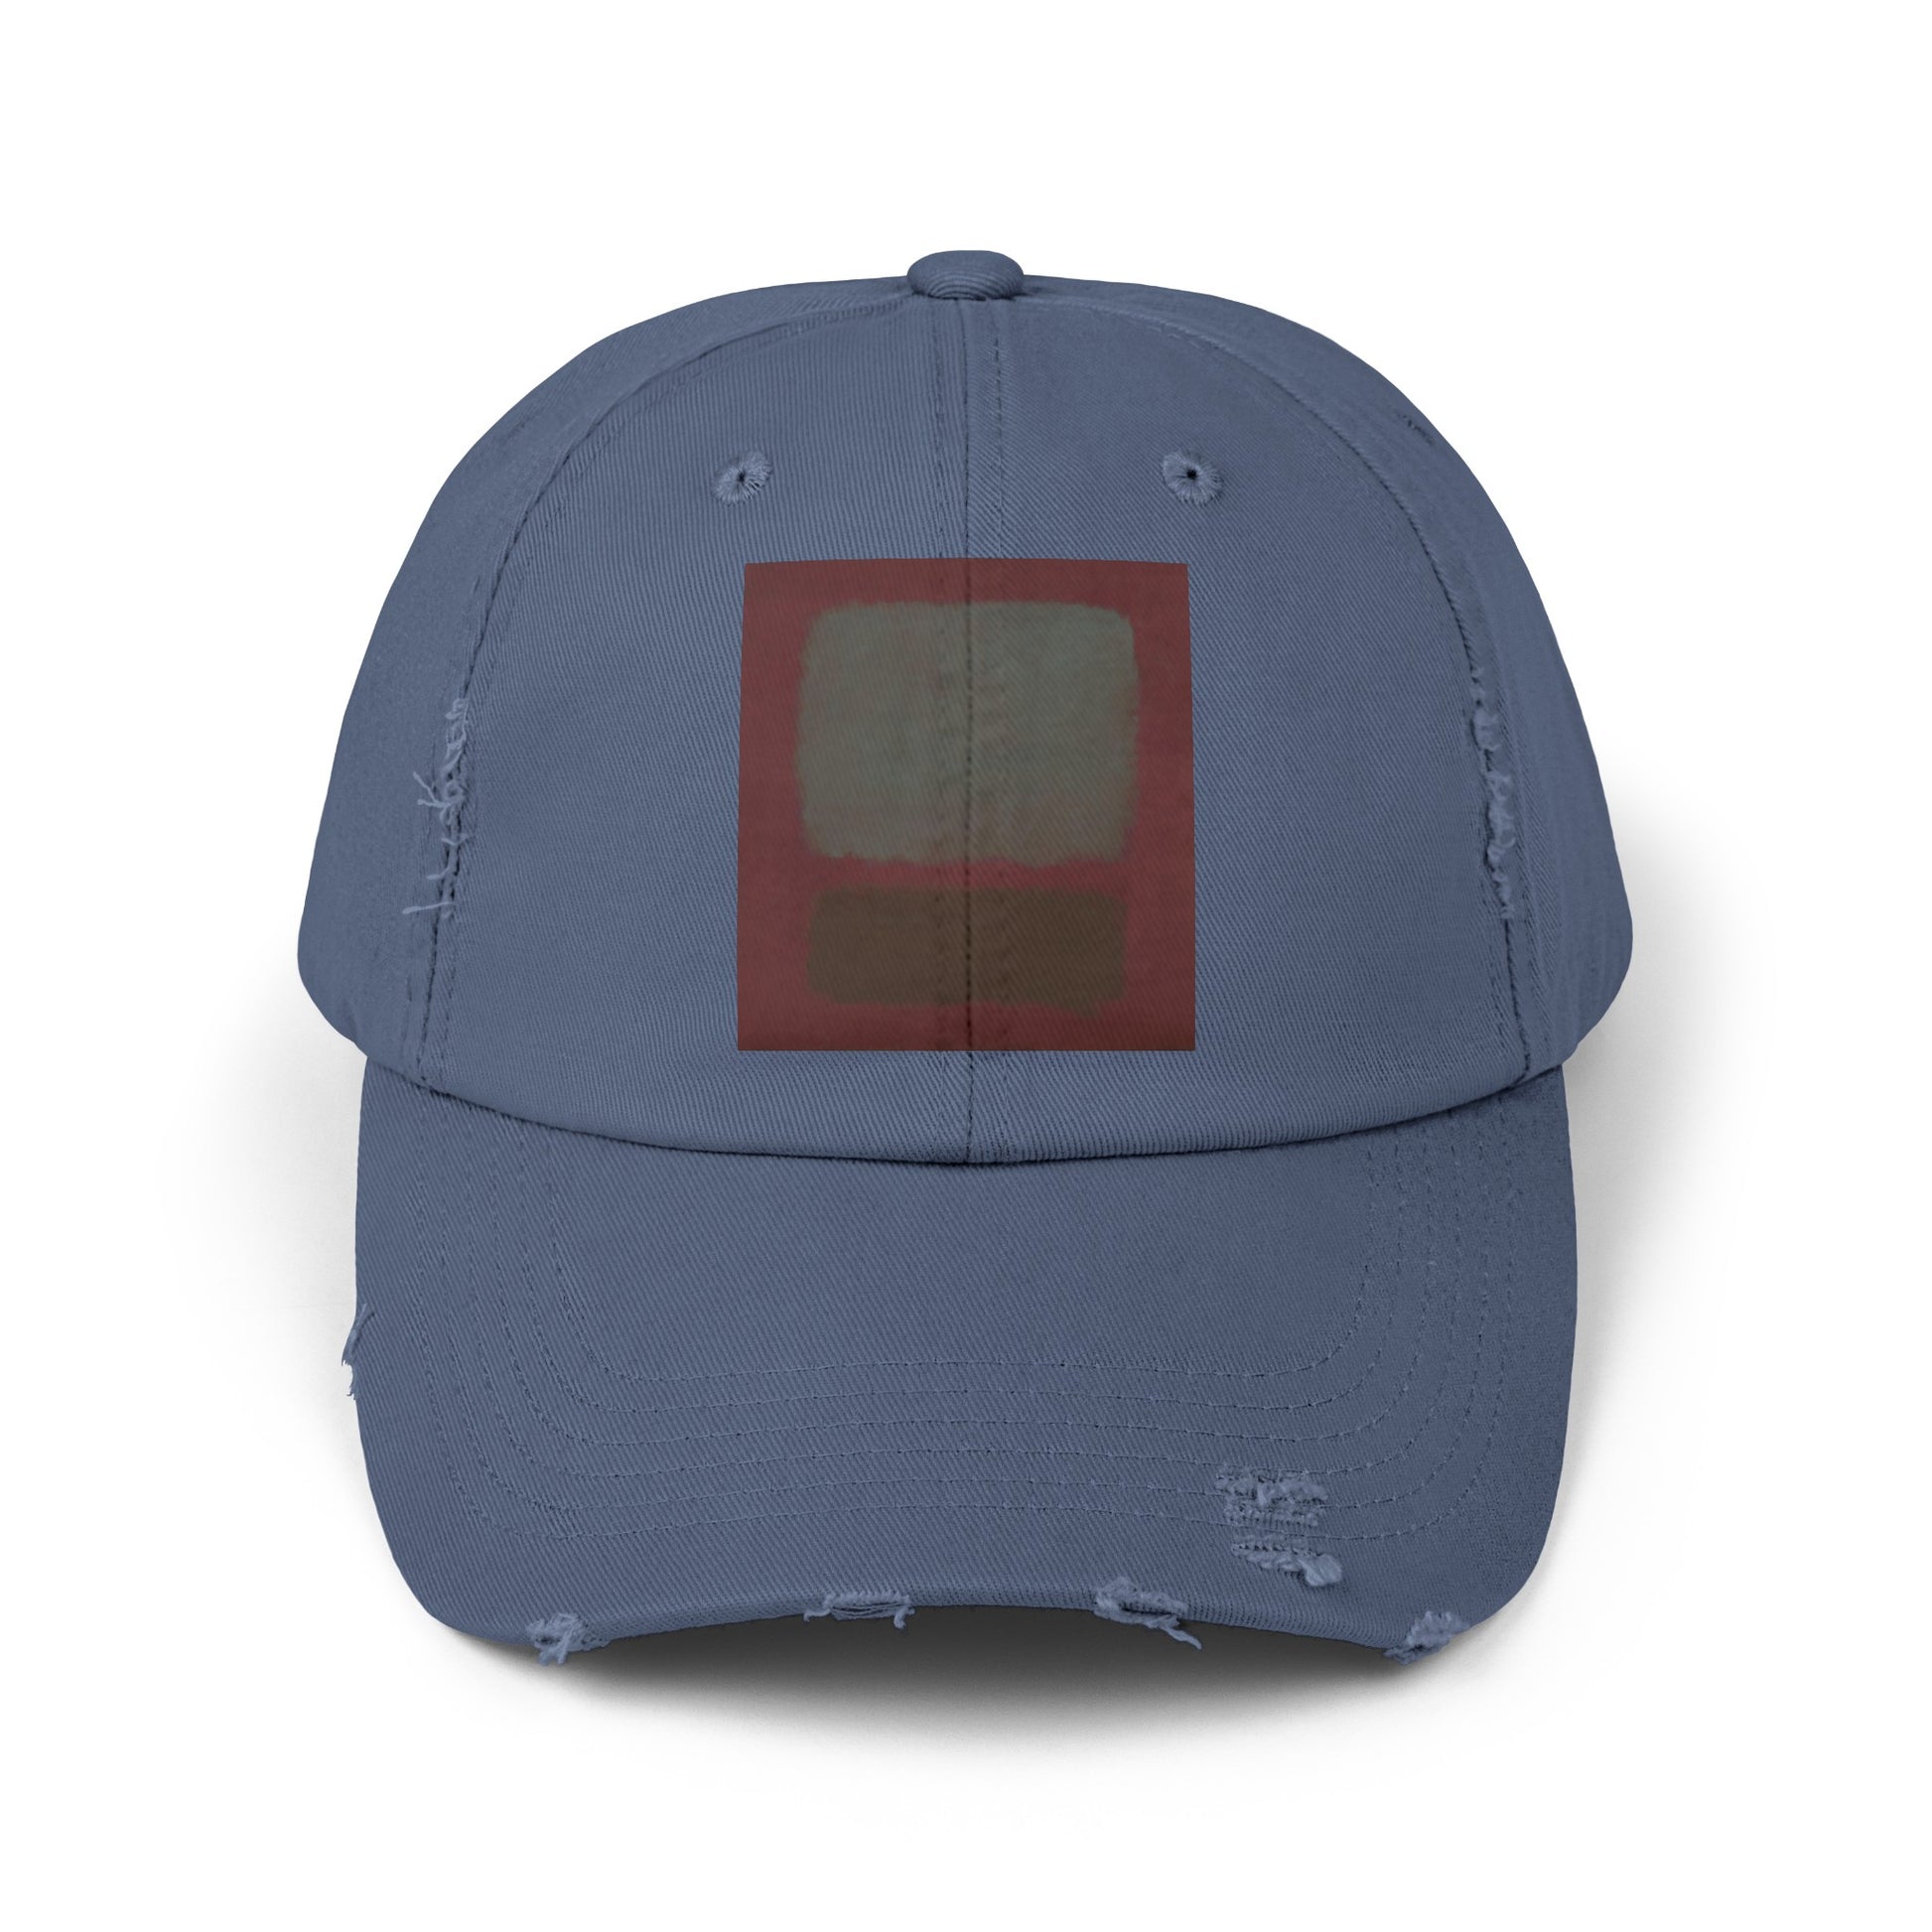 a blue hat with a red square on it